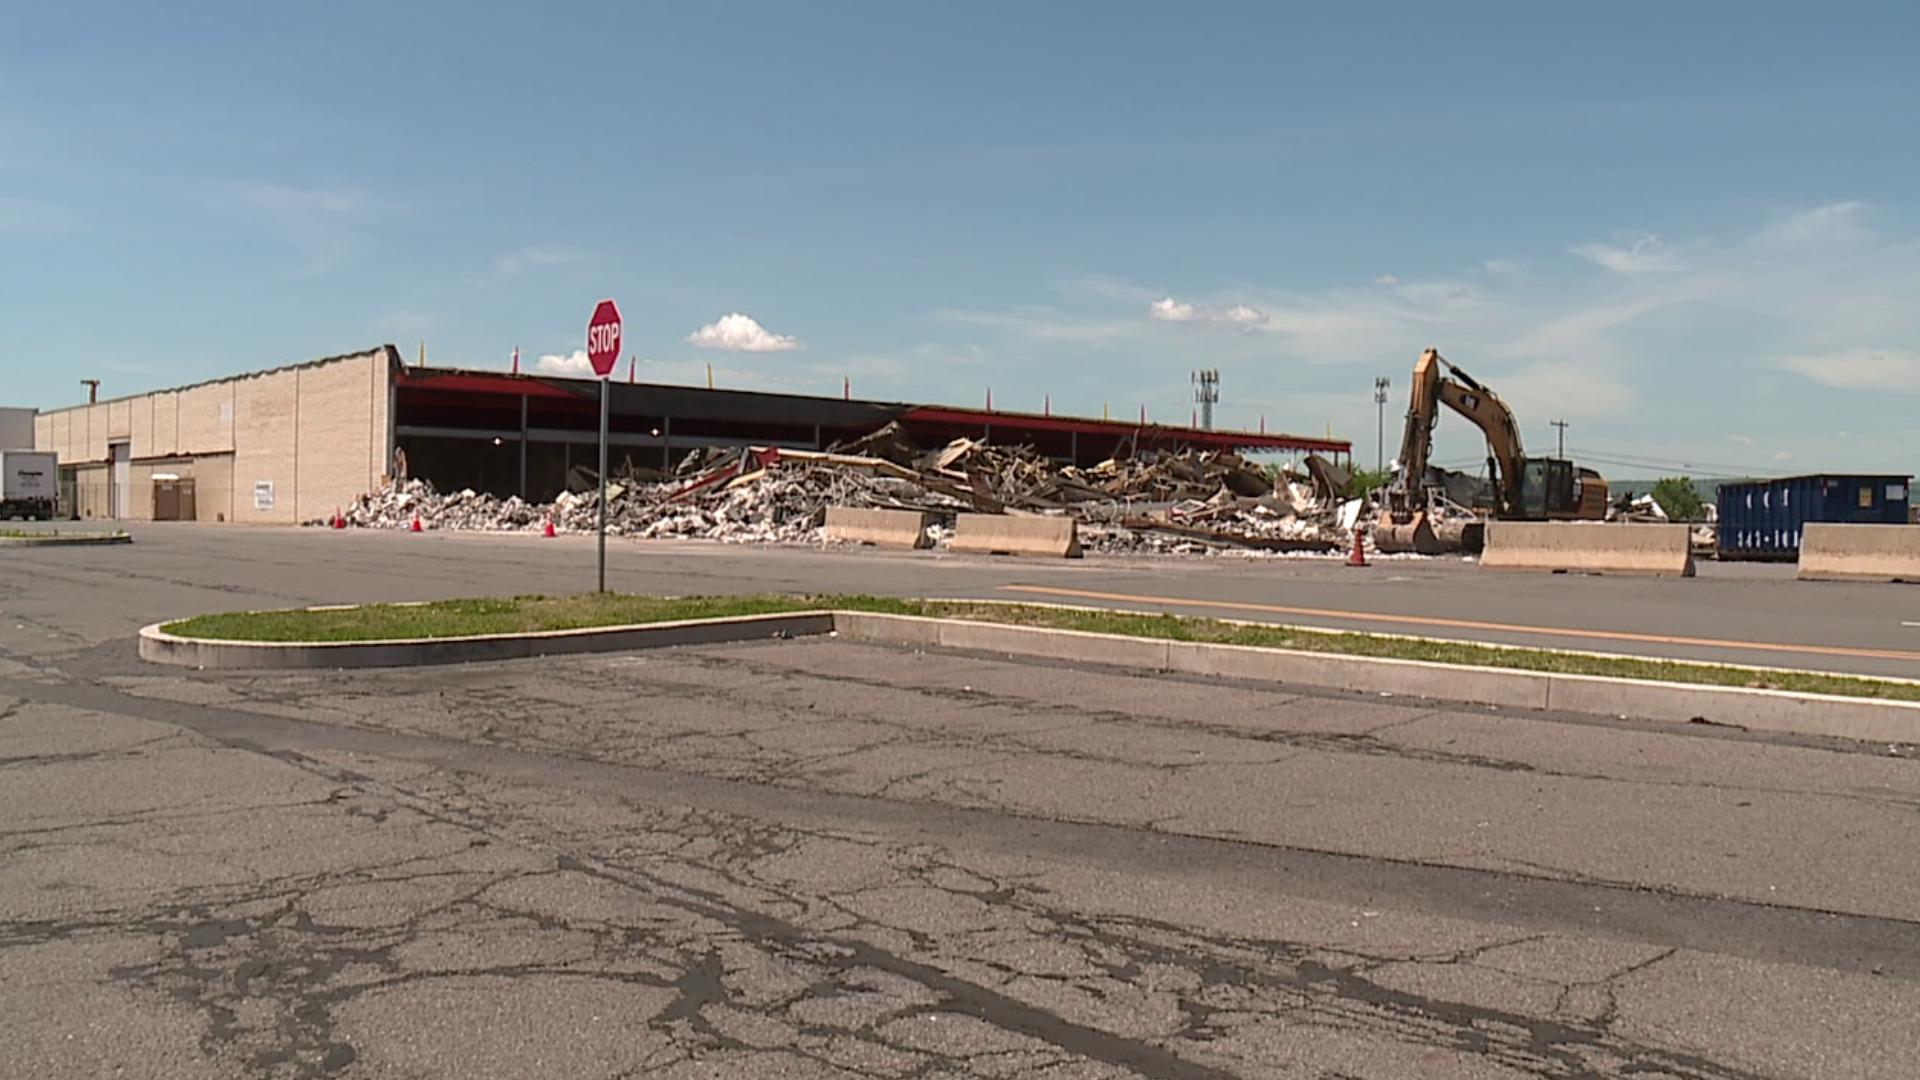 The former Kmart along Route 309 in Wilkes-Barre Township that closed back in 2020 is being torn down.